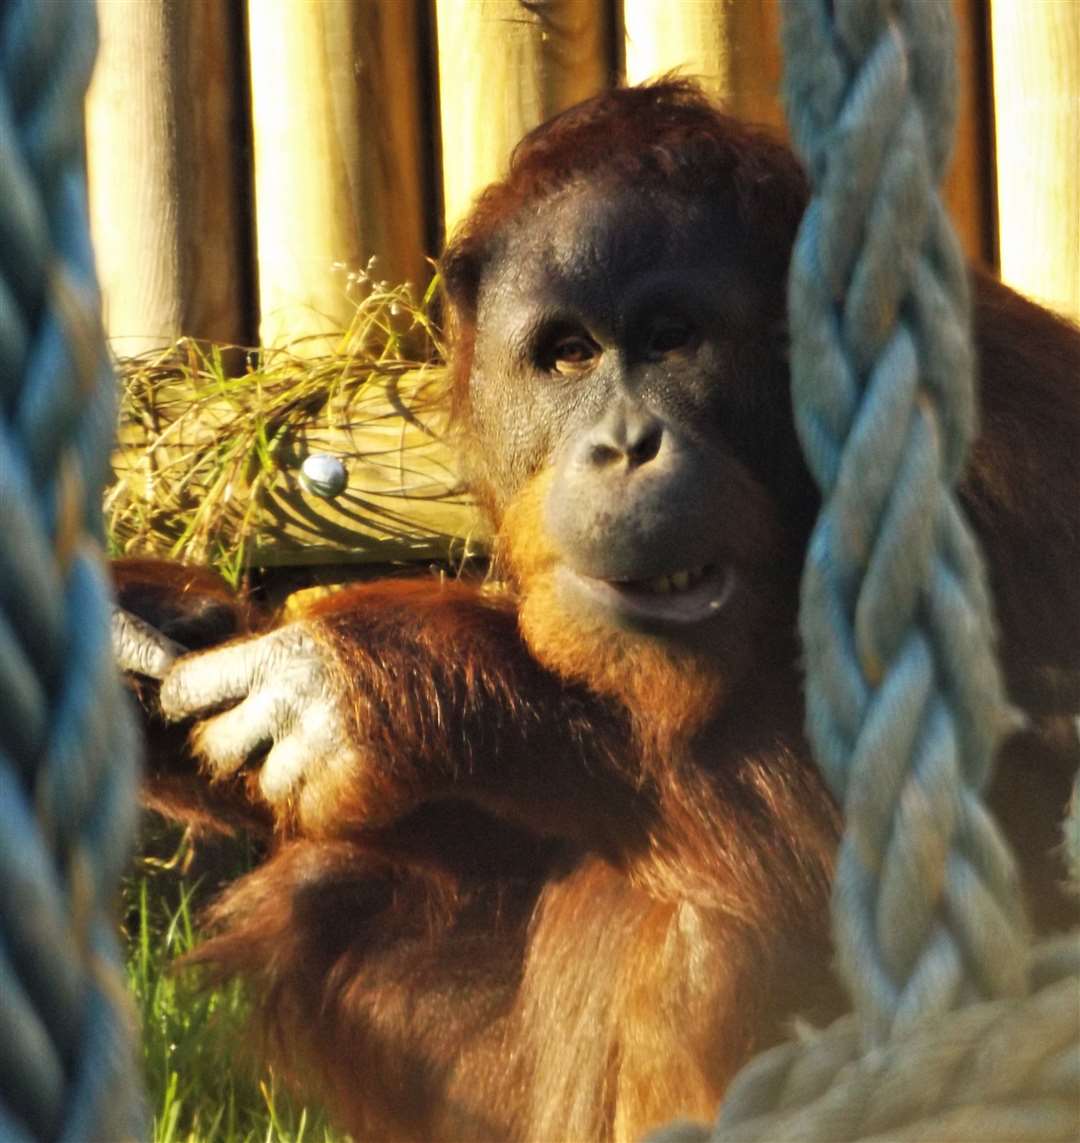 You could be seeing the orangutans at Wingham Wildlife Park